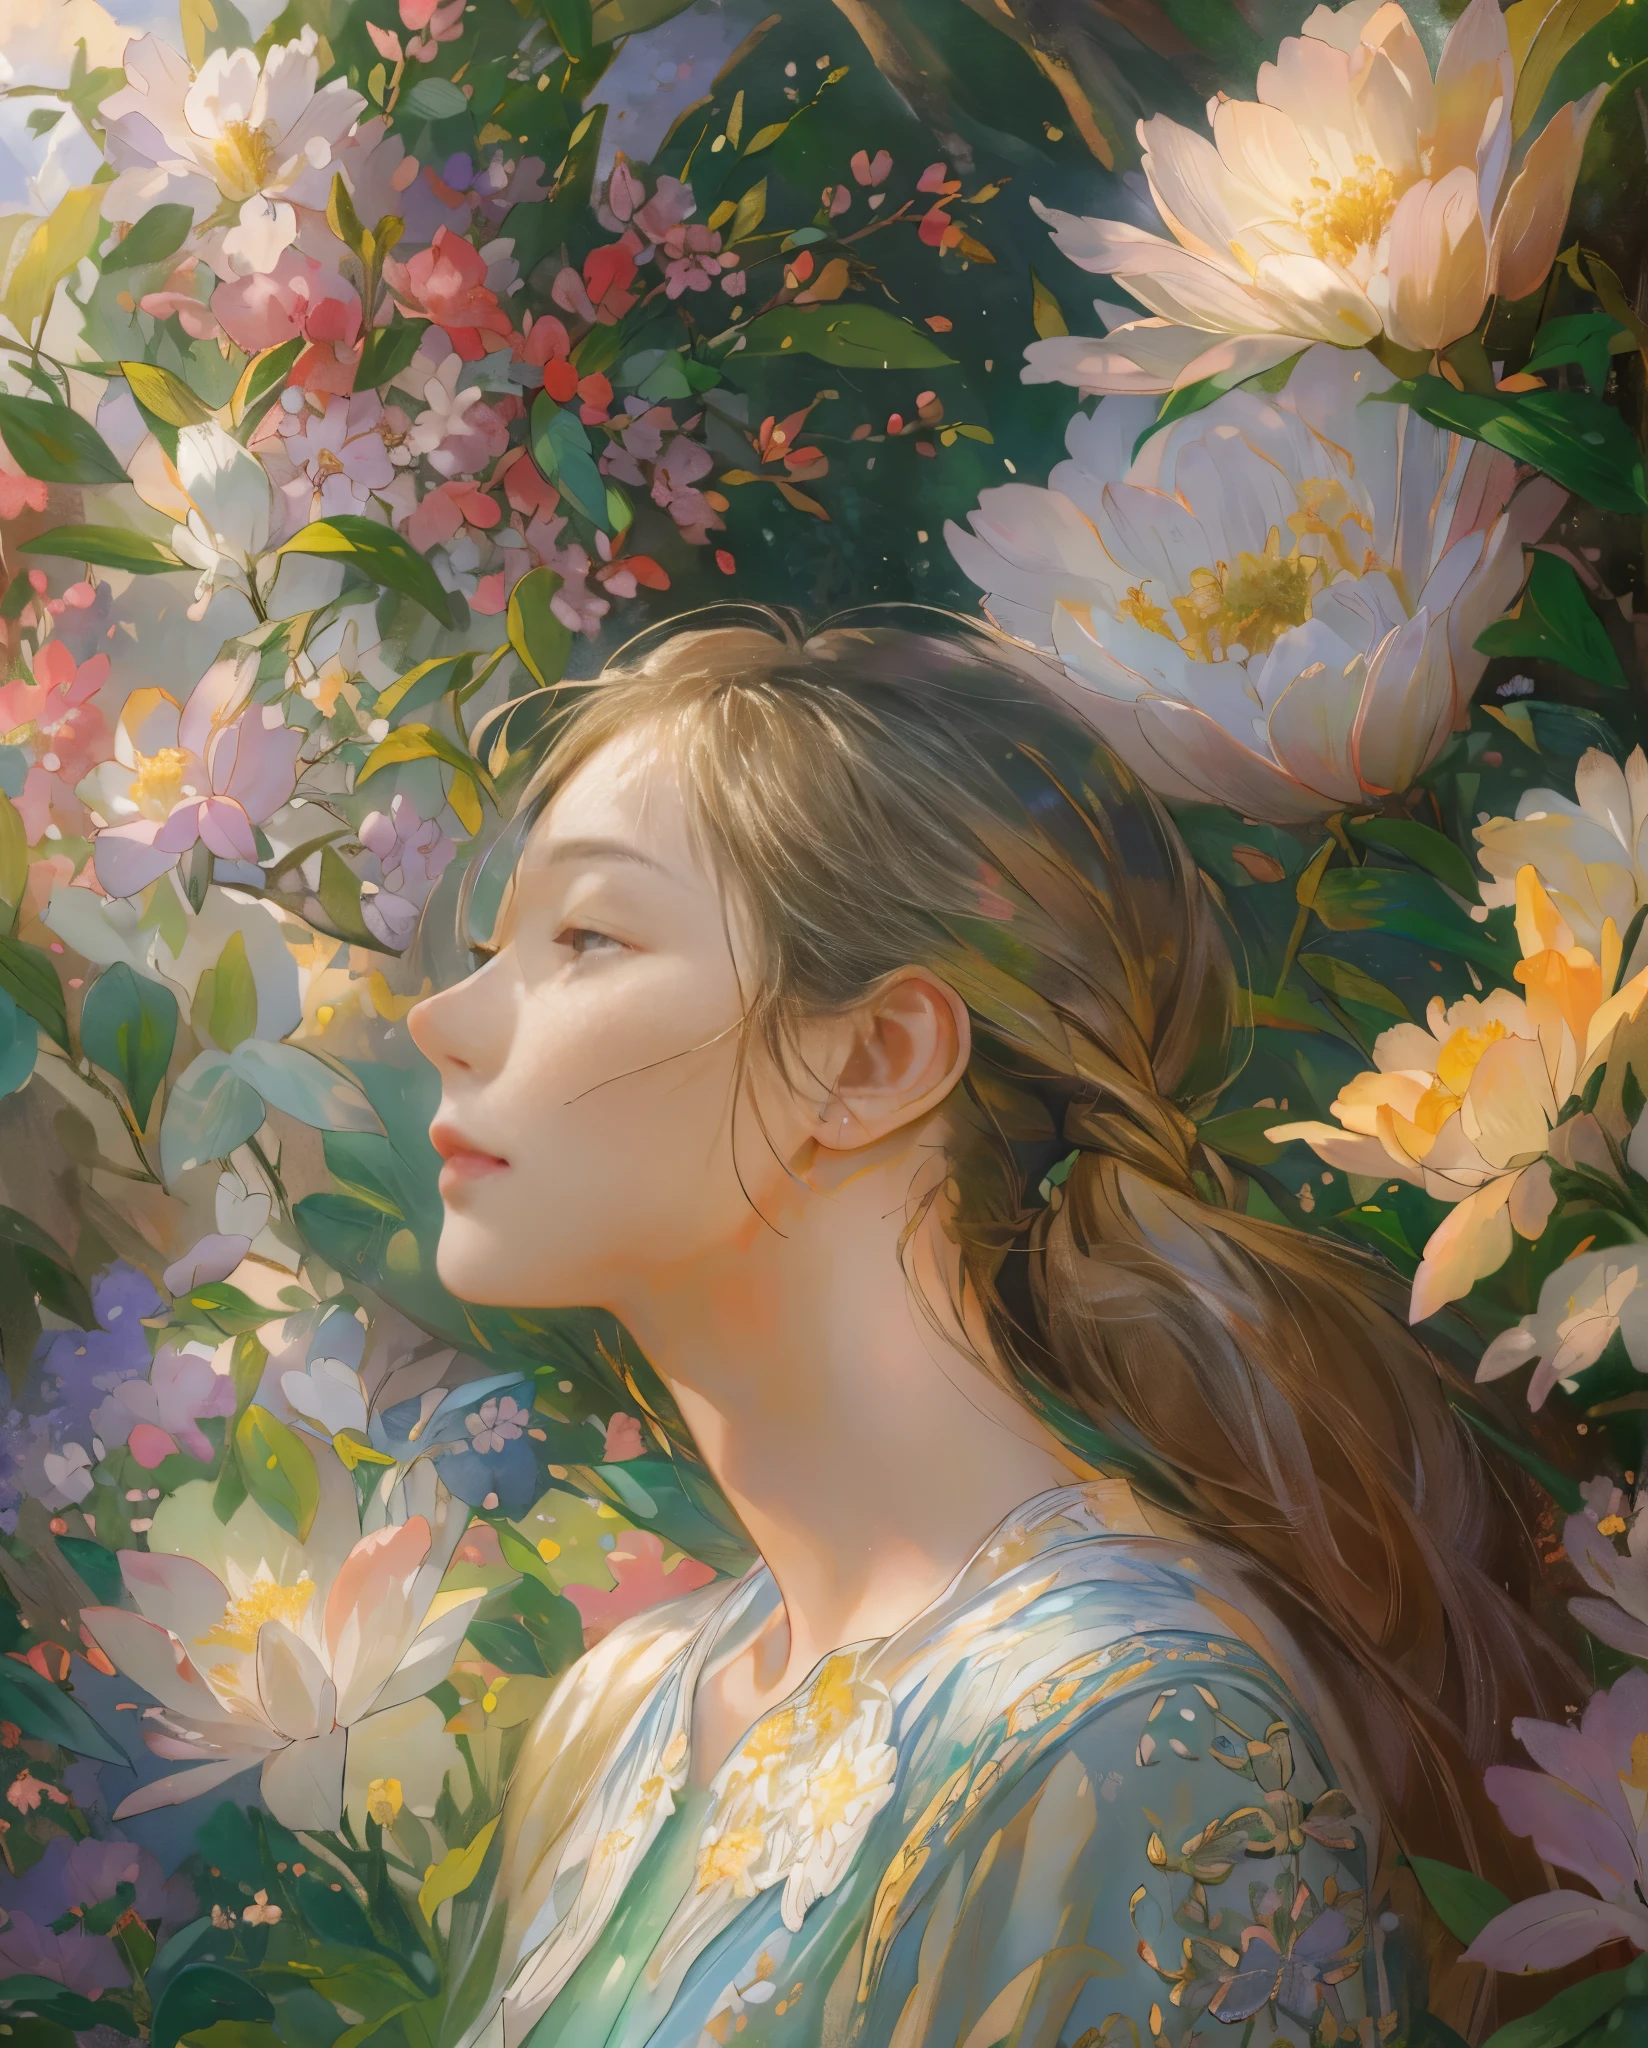 (photorealistic:1.37),(professional),(bright colors),(sharp focus),(human development report),portrait,woman in fantasy garden,soft light,Radiant expression,natural posture,flowers in the background,Subtle color palette,Fine strokes,pastel tones,Beautiful features,peaceful atmosphere